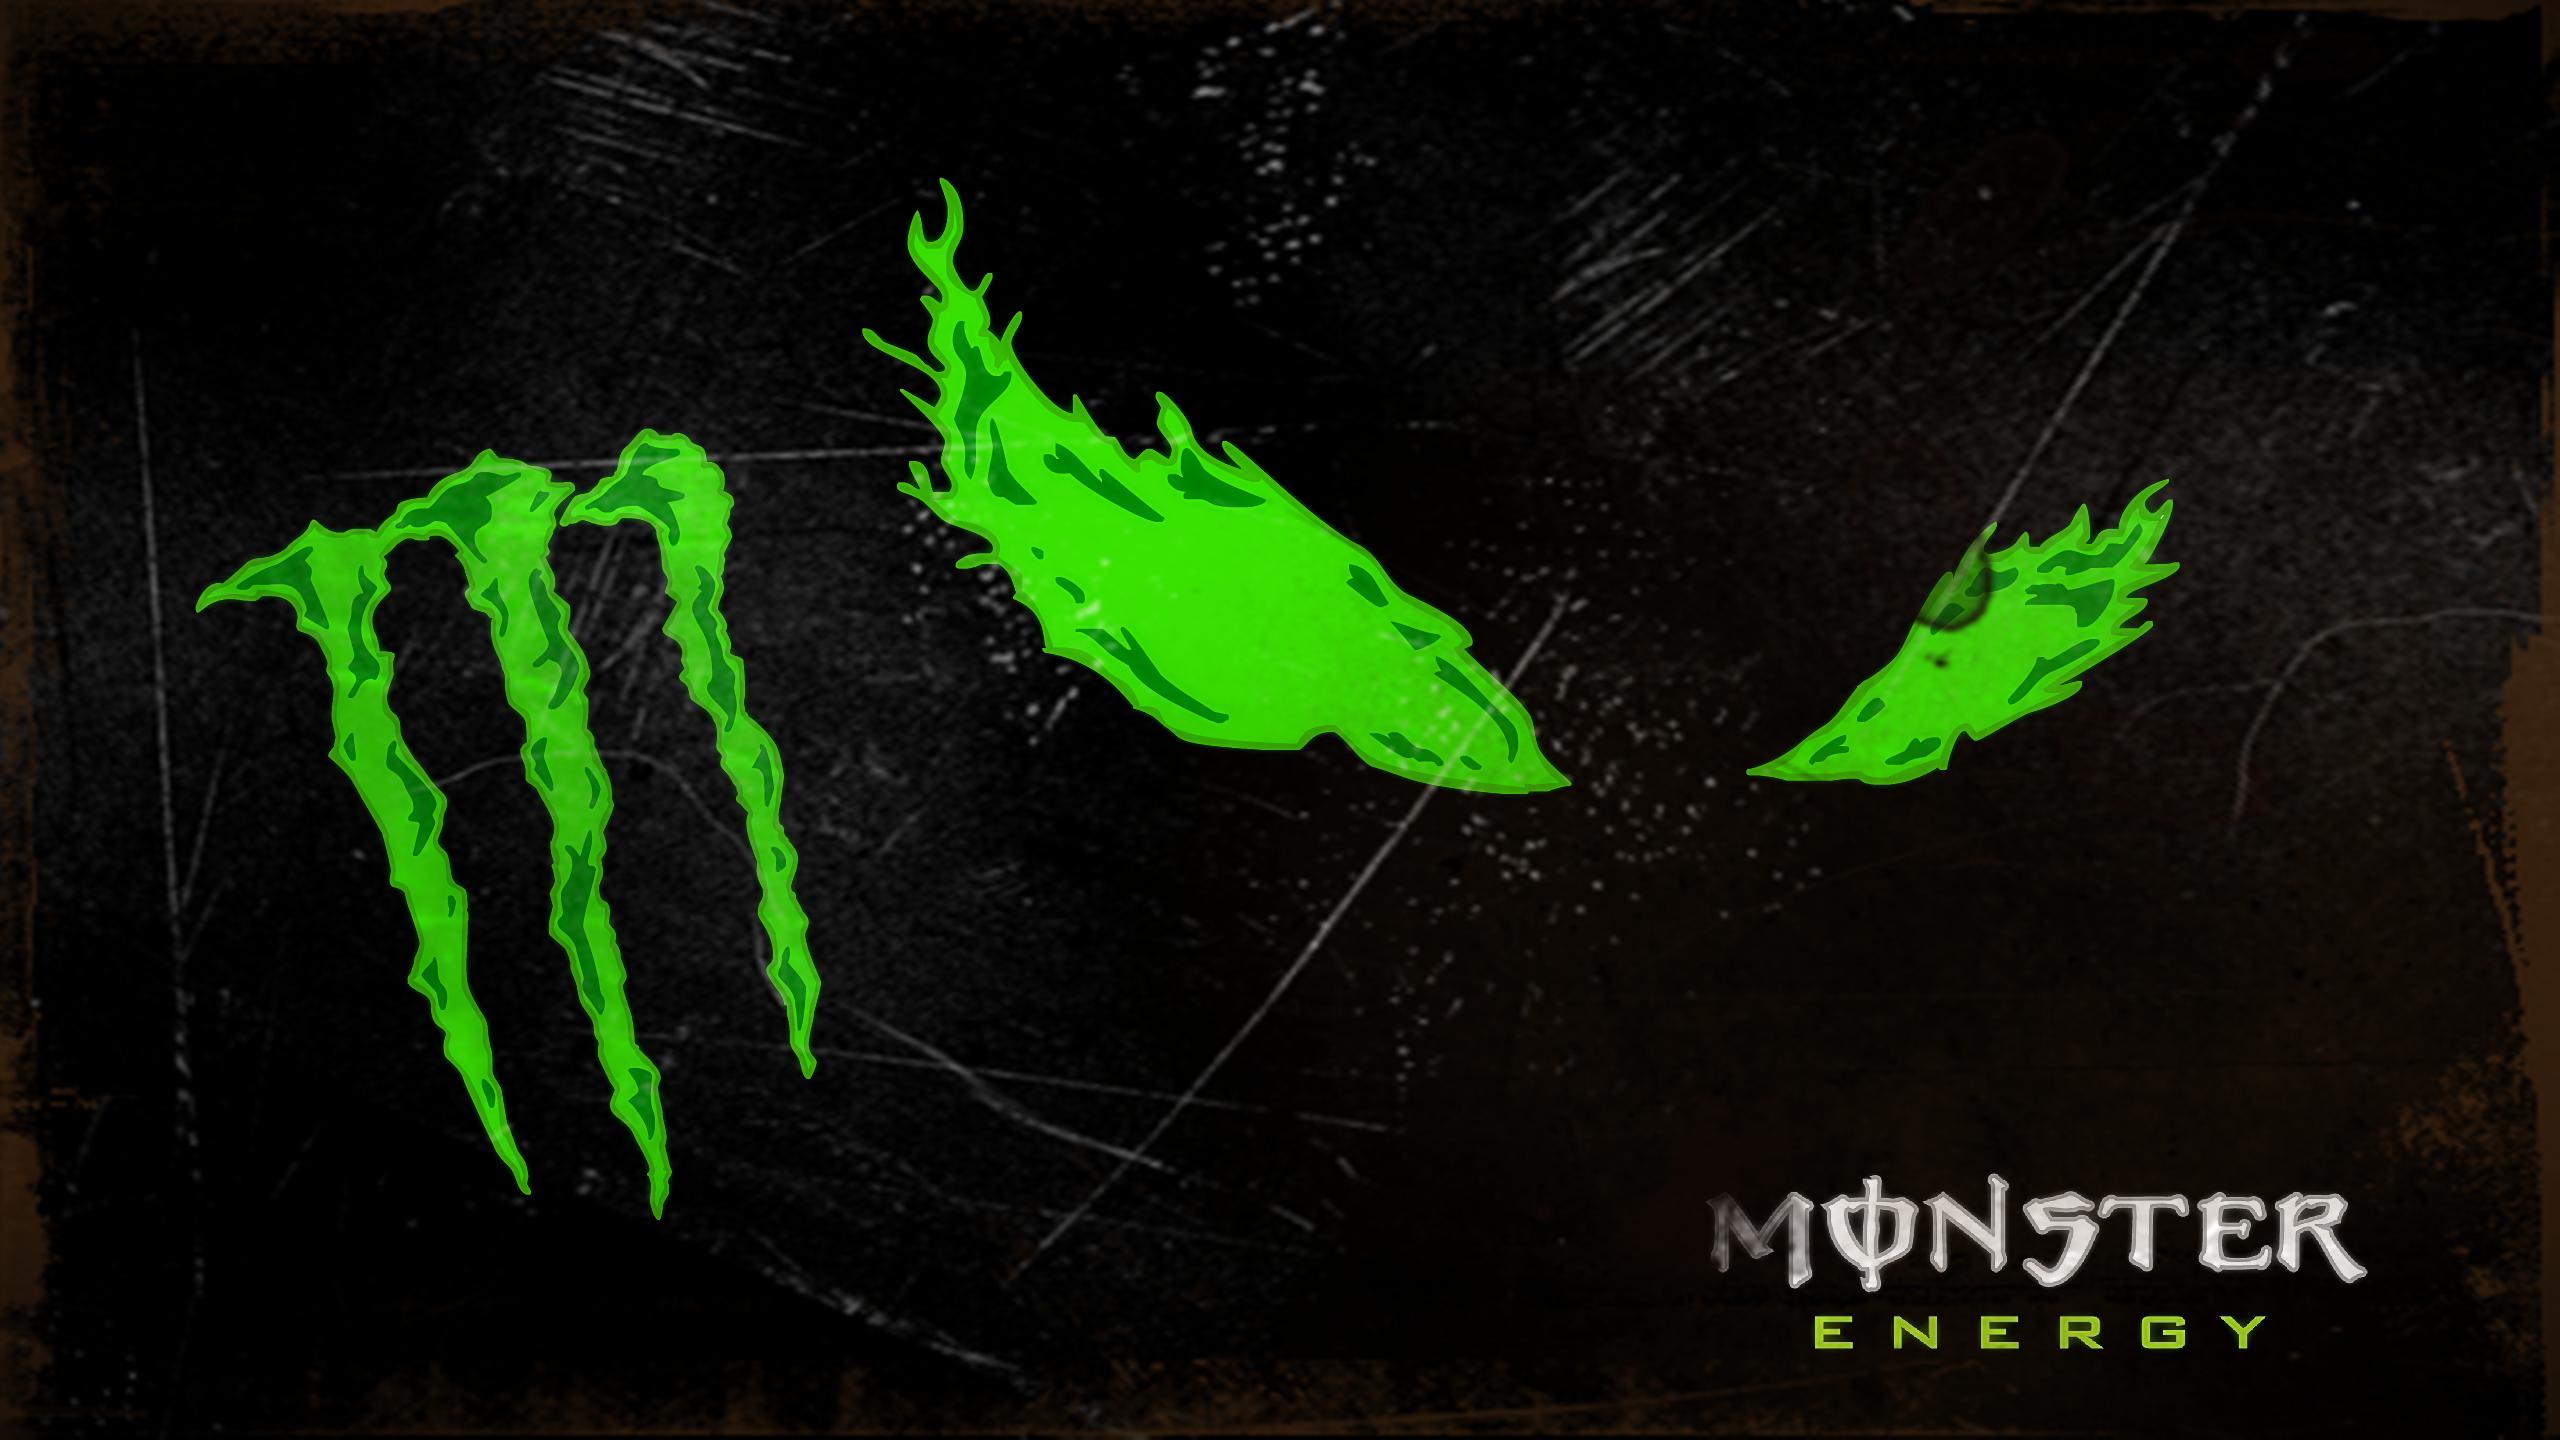 Free Download You Can Download Monster Energy Wallpaper For Android Owzqy In Your 2560x1440 For Your Desktop Mobile Tablet Explore 49 Monster Energy Wallpaper For Android Best Phone Wallpaper